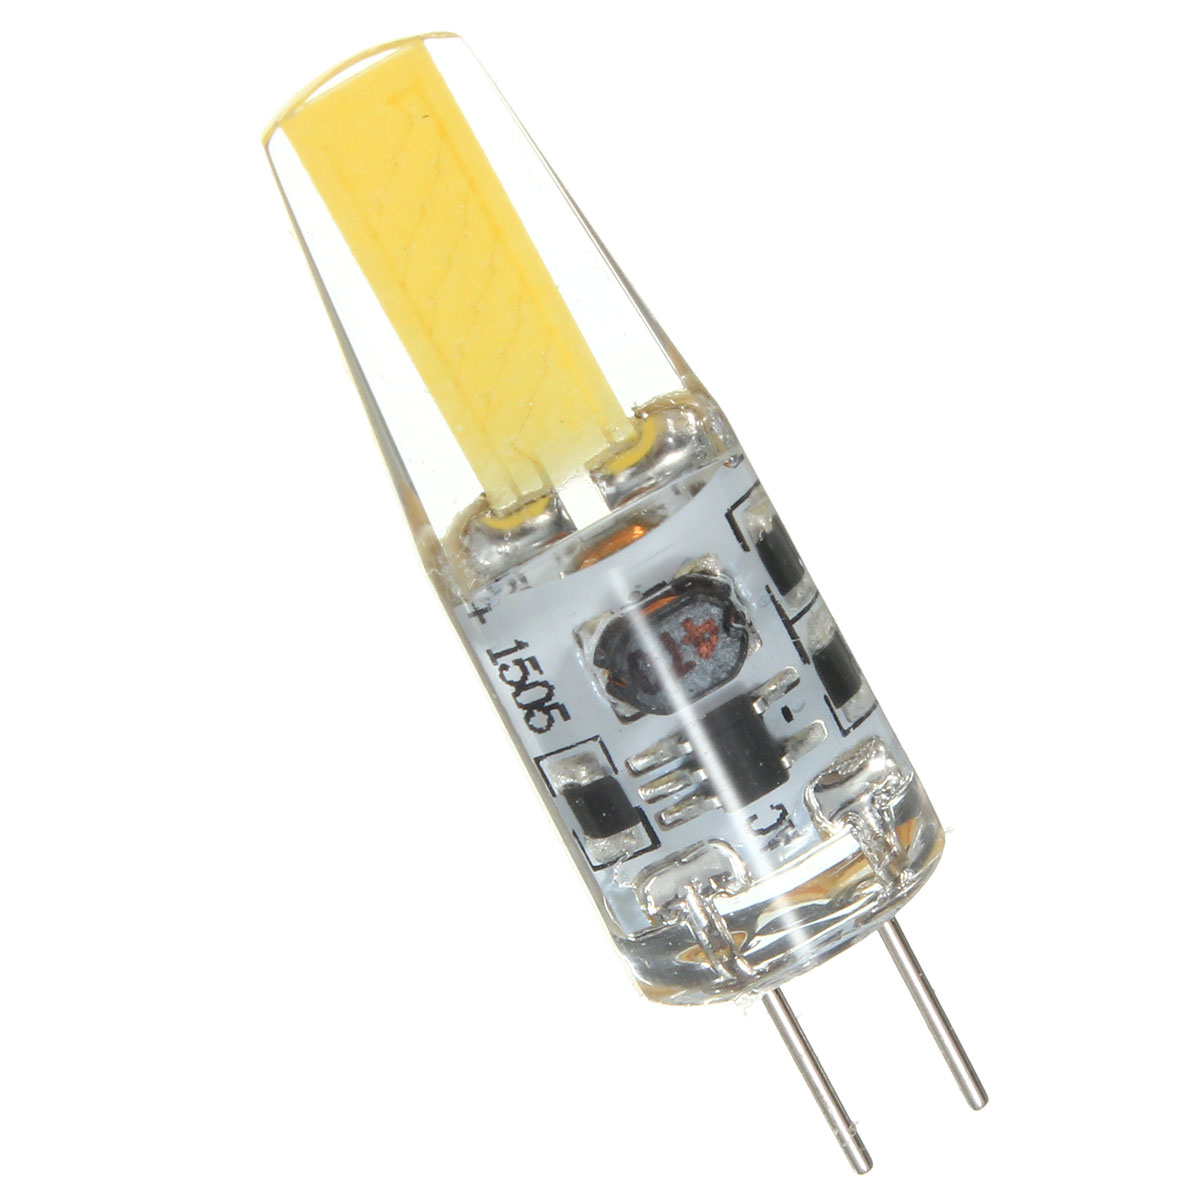 G4-2W-COB-LED-Crystal-Light-Silicone-Bulb-Pure-White-Warm-White-Cold-White-Lamp-For-Home-DC-12V-1060797-9